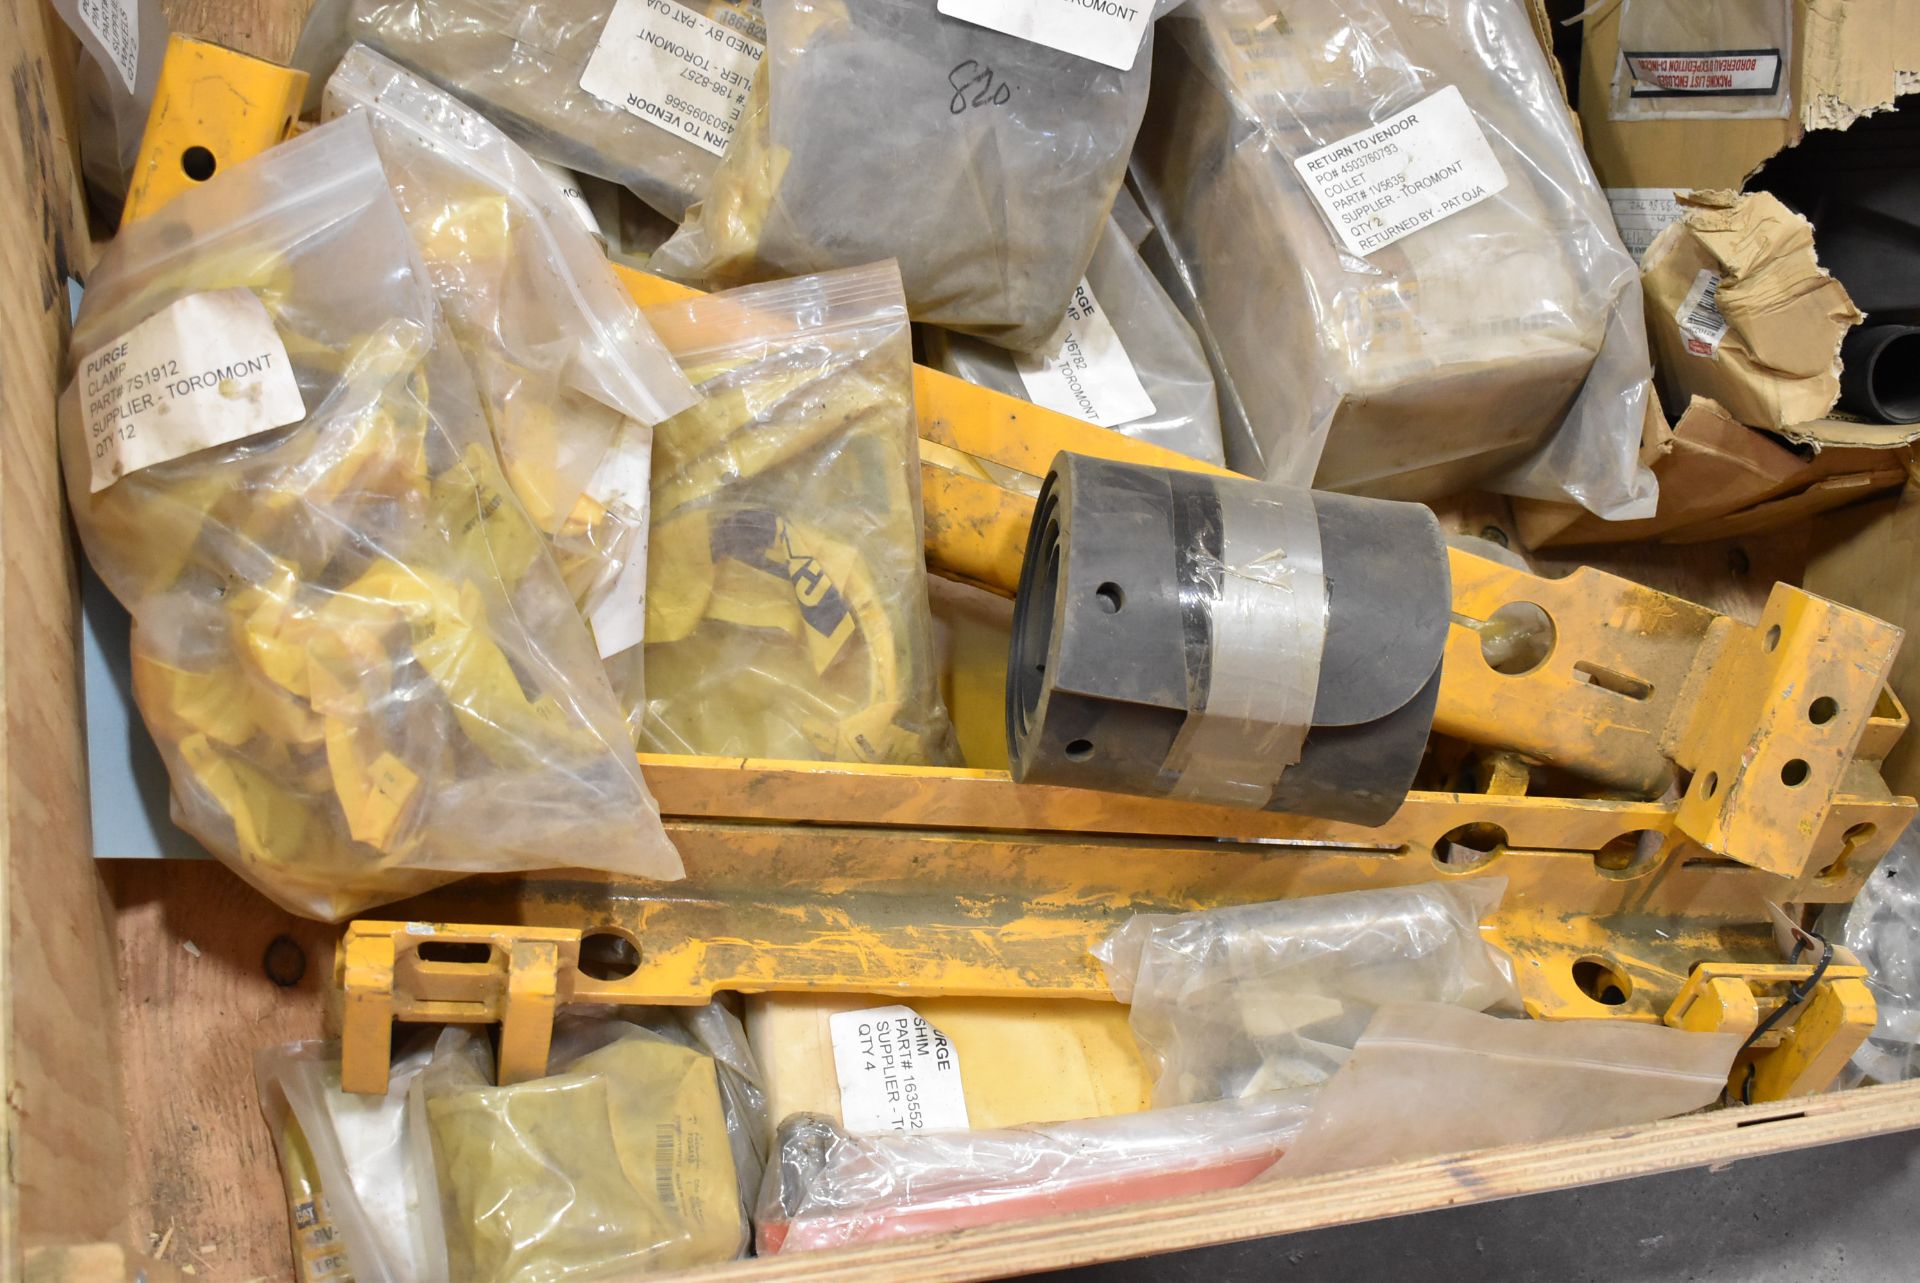 LOT/ SKID WITH CATERPILLAR PARTS - INCLUDING CLAMPS, COLLETS, SHIMS, GROMMETS, VALVES, BRACKETS, - Image 2 of 6